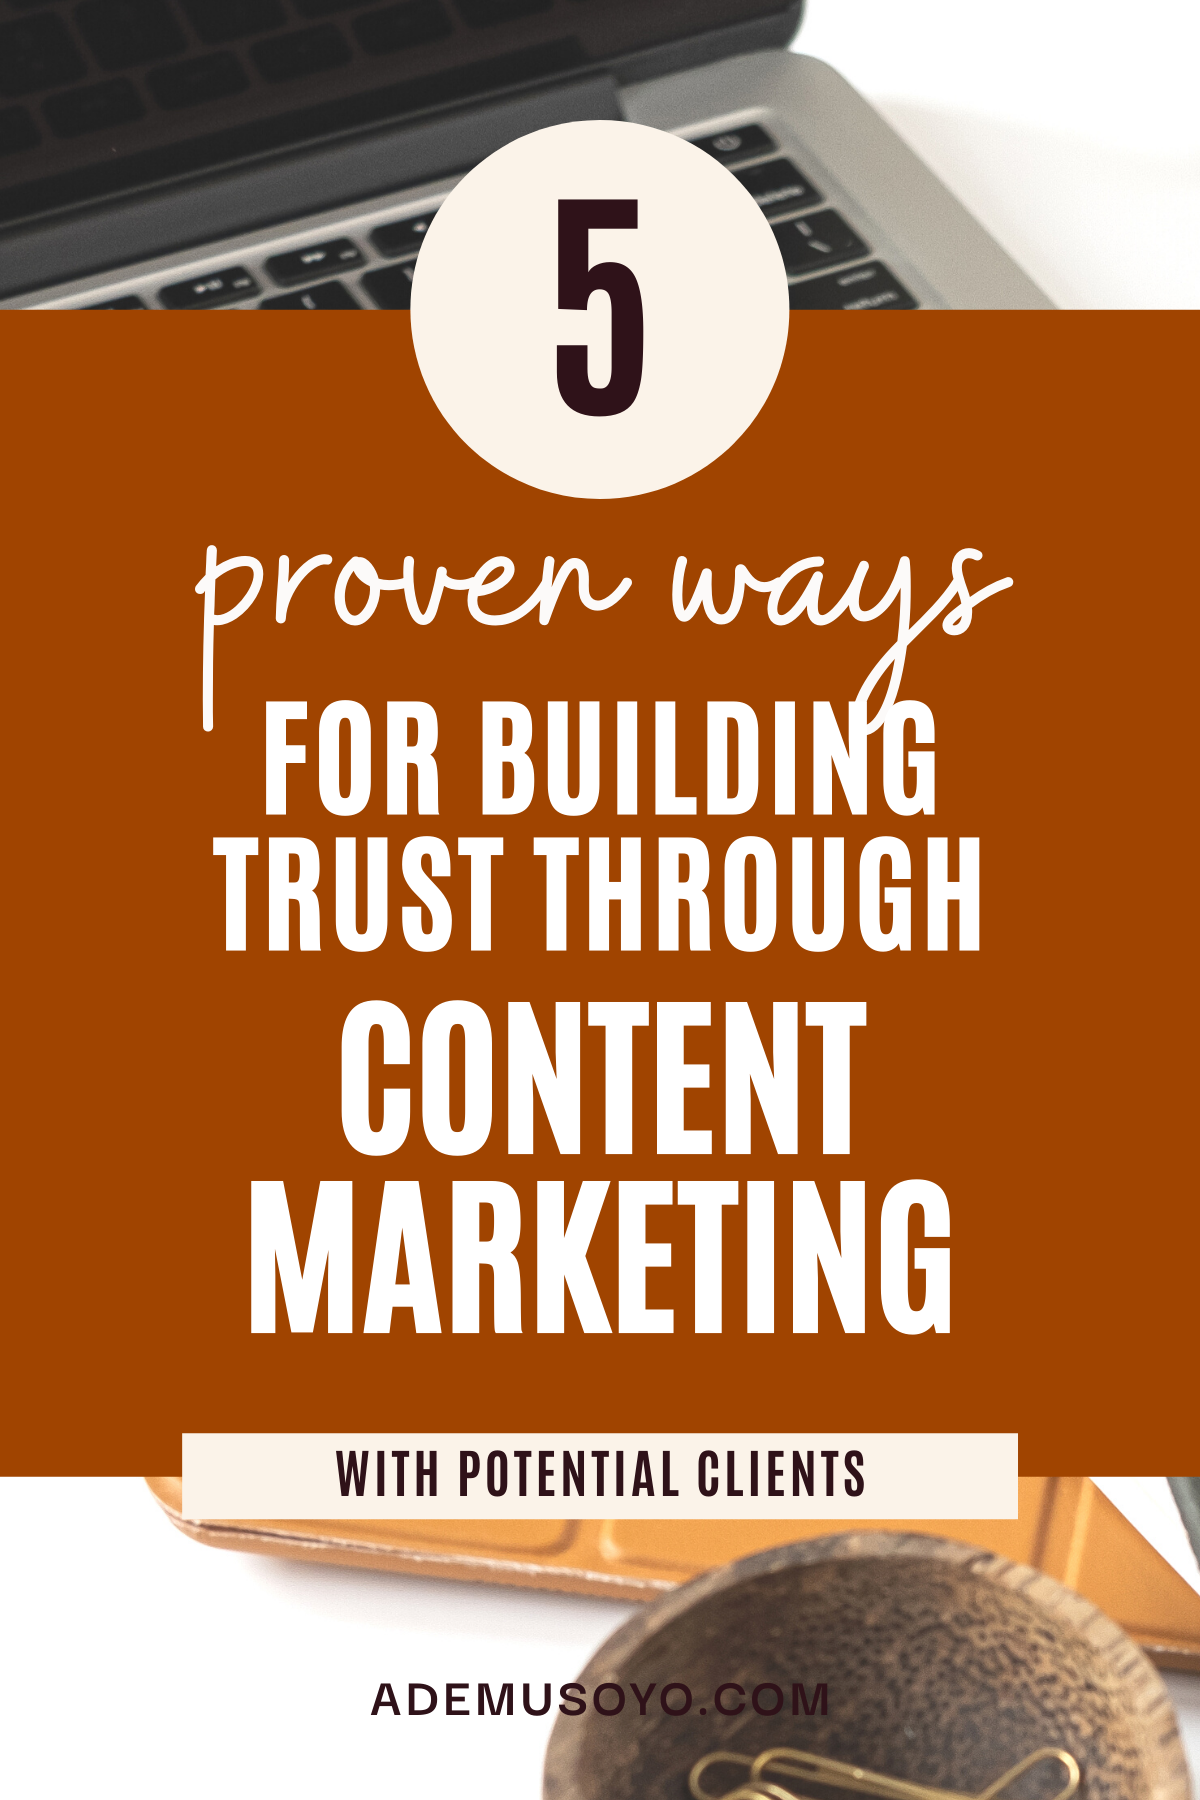 How to Build Trust With Content Marketing - 5 Proven Strategies, building trust through content marketing, content marketing strategy tips, content marketing plan